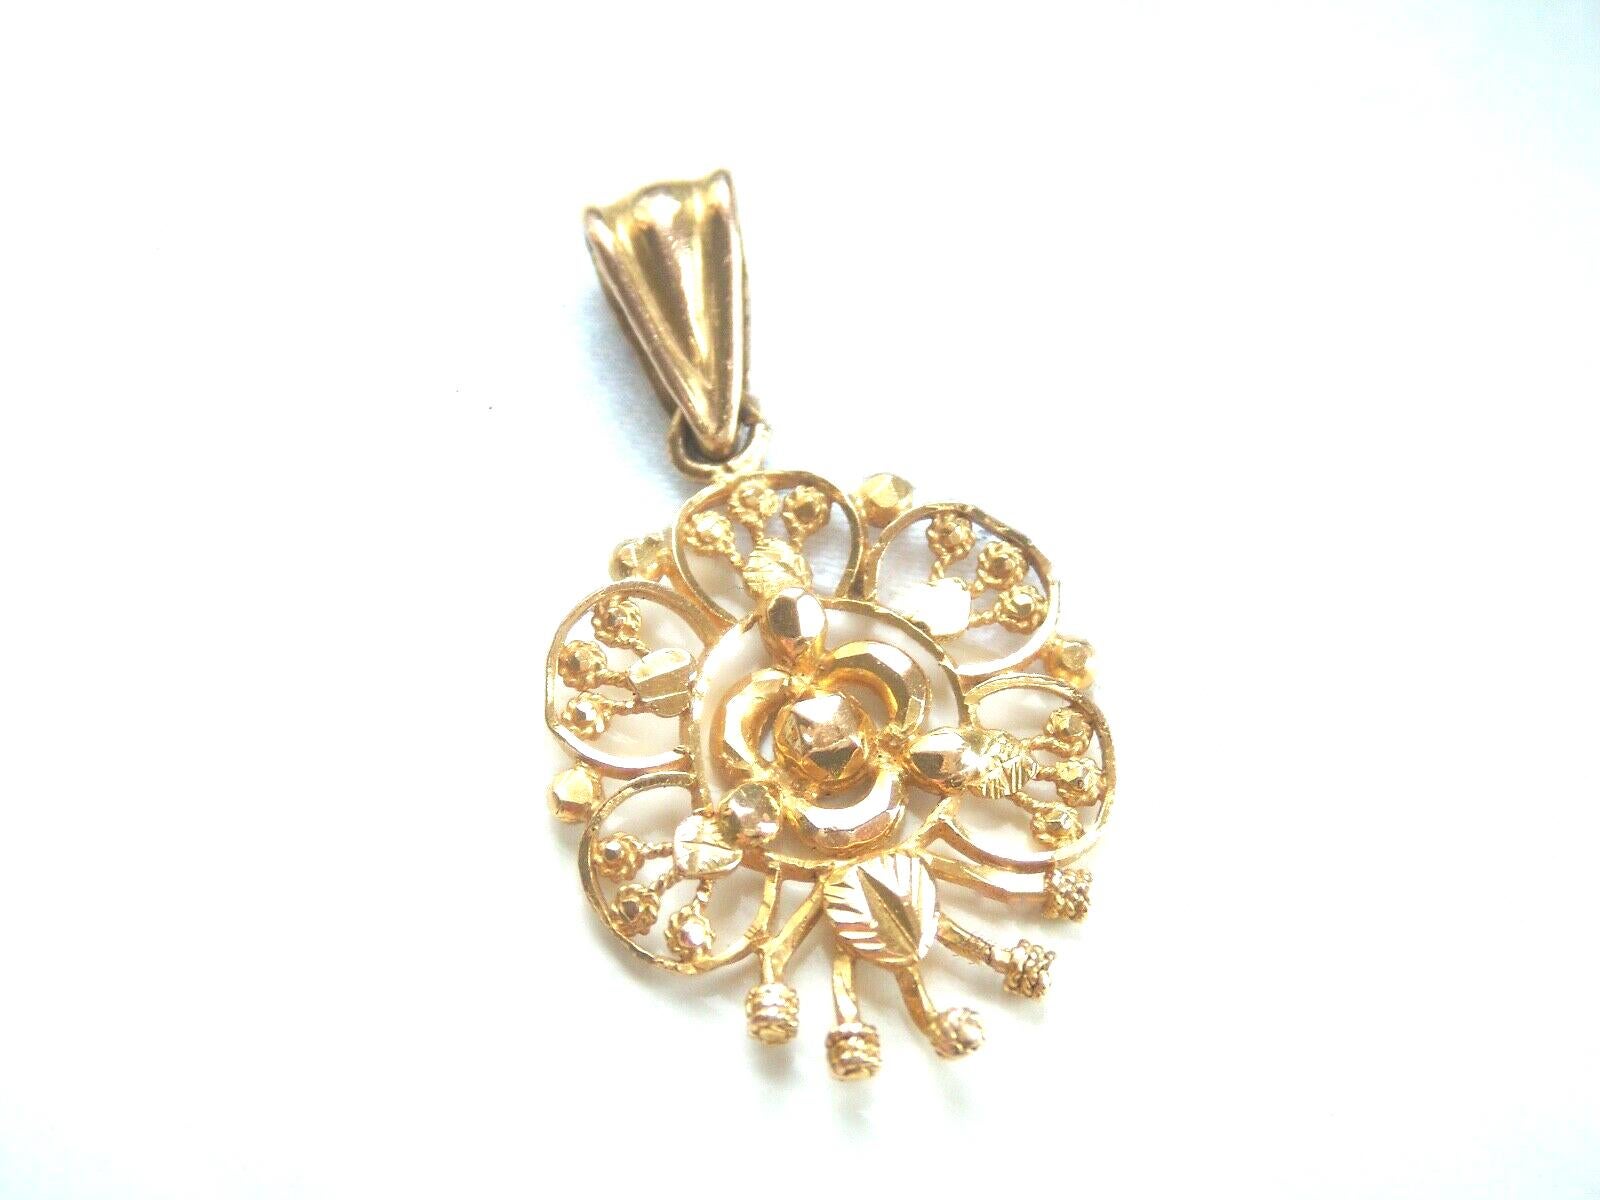 18ct 750 Gold Pendant
Far Eastern Design
Great condition Like New
Fully Hallmarked on Bail . Laser applied by London Assay Hallmarks in 2019

 